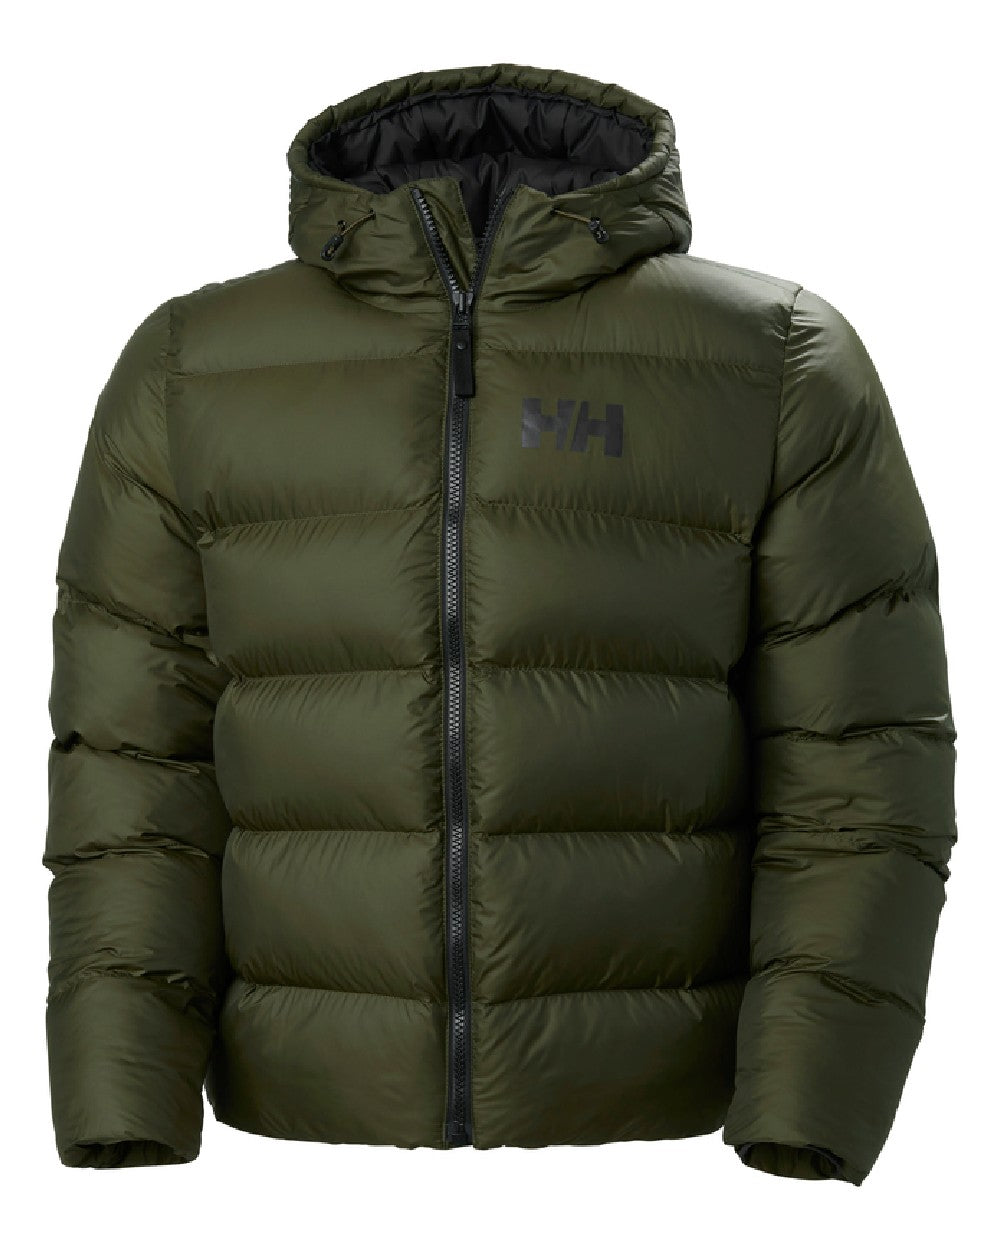 Helly Hansen Mens Active Puffy Jacket in Utility Green 